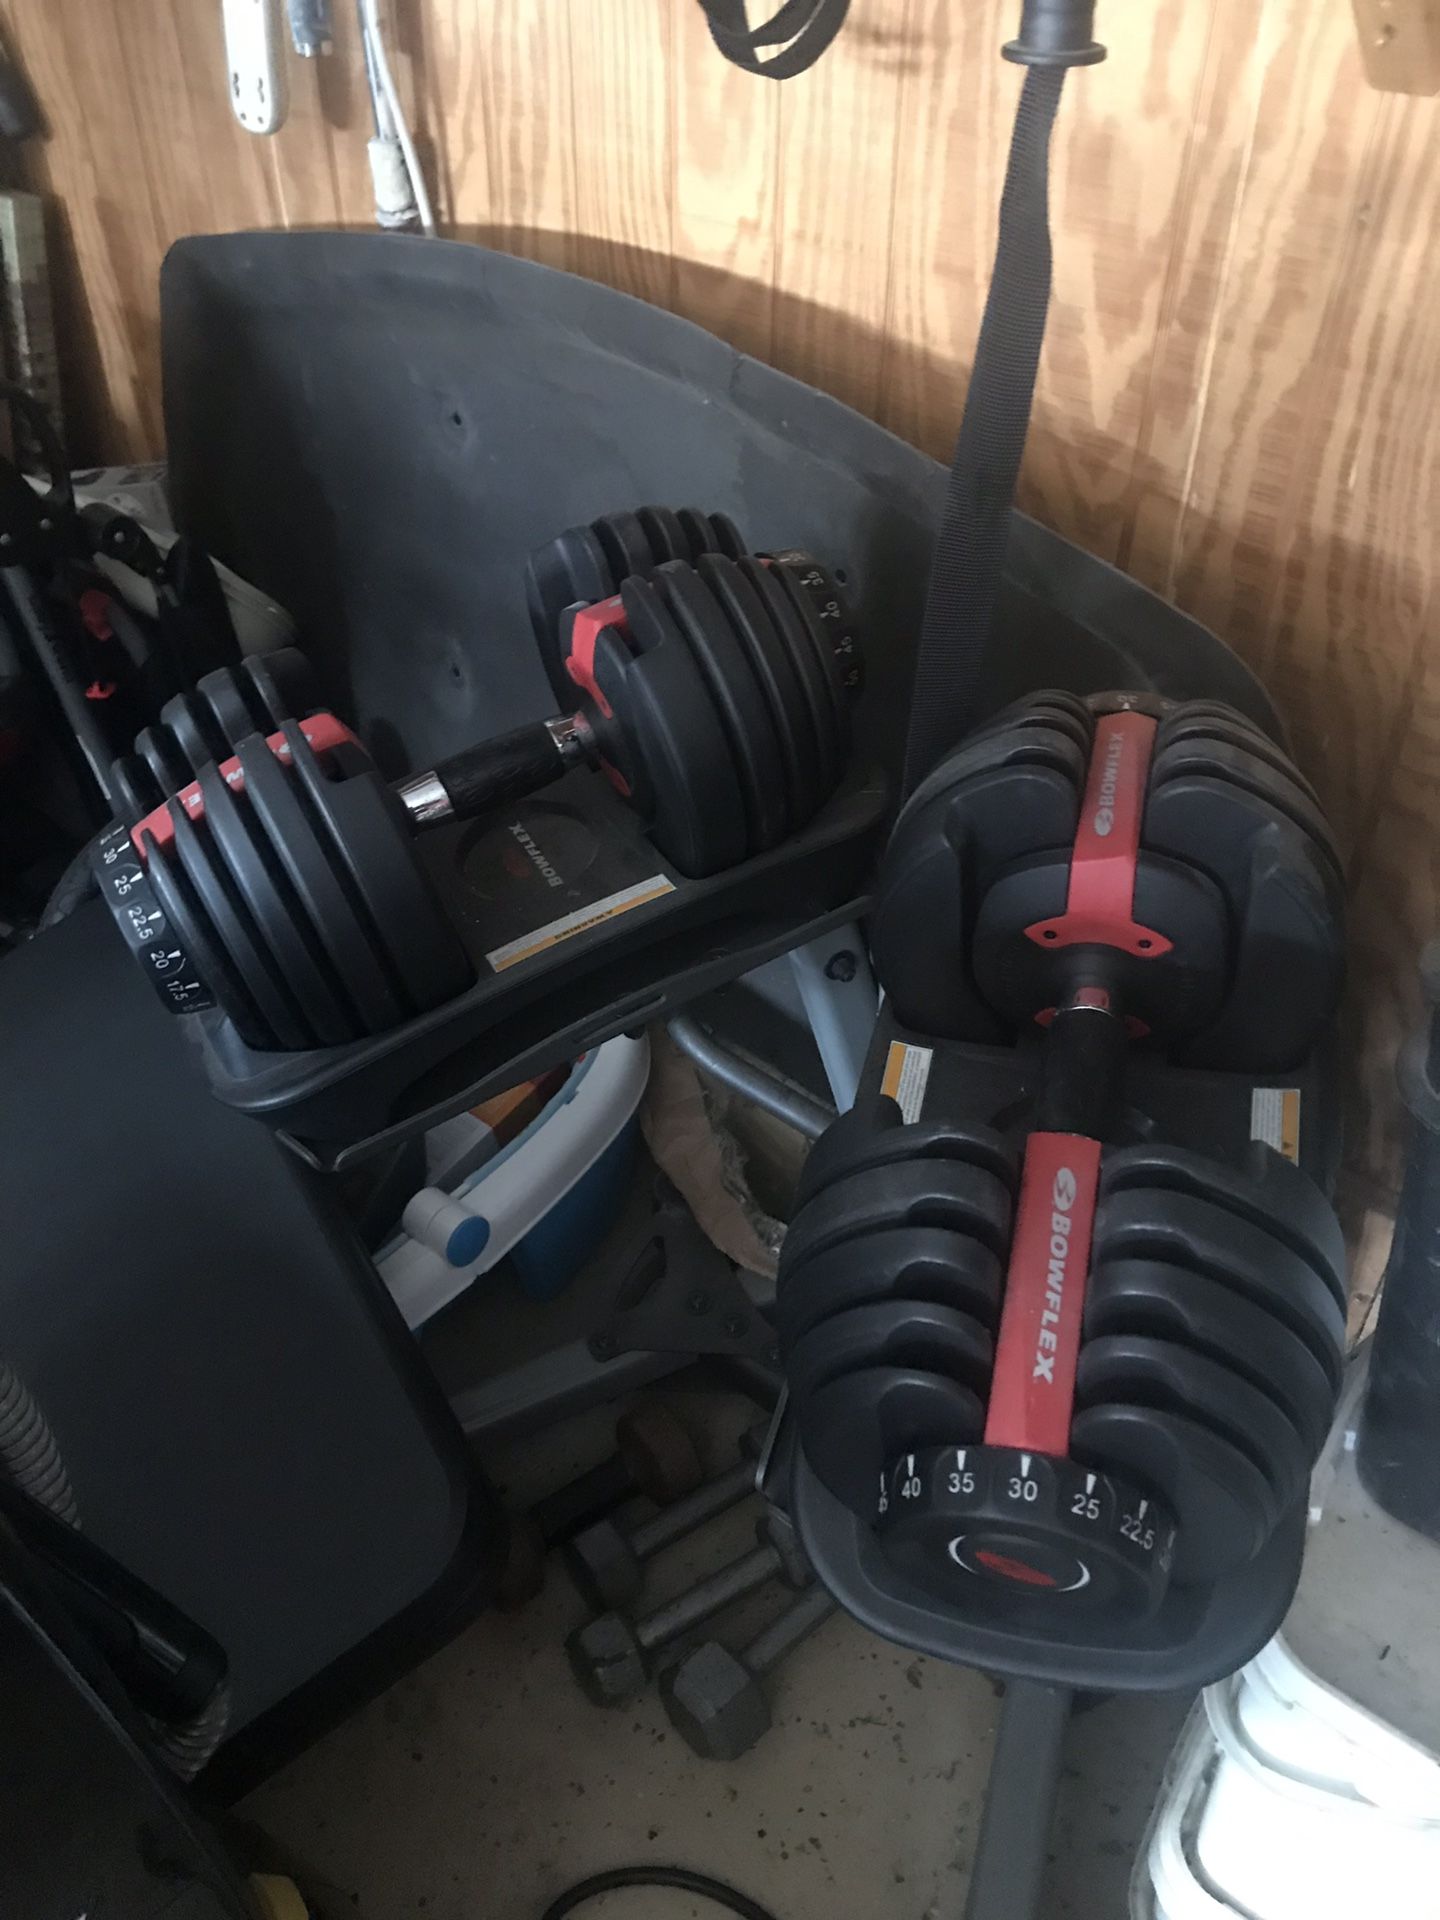 Bowflex select weight with stand